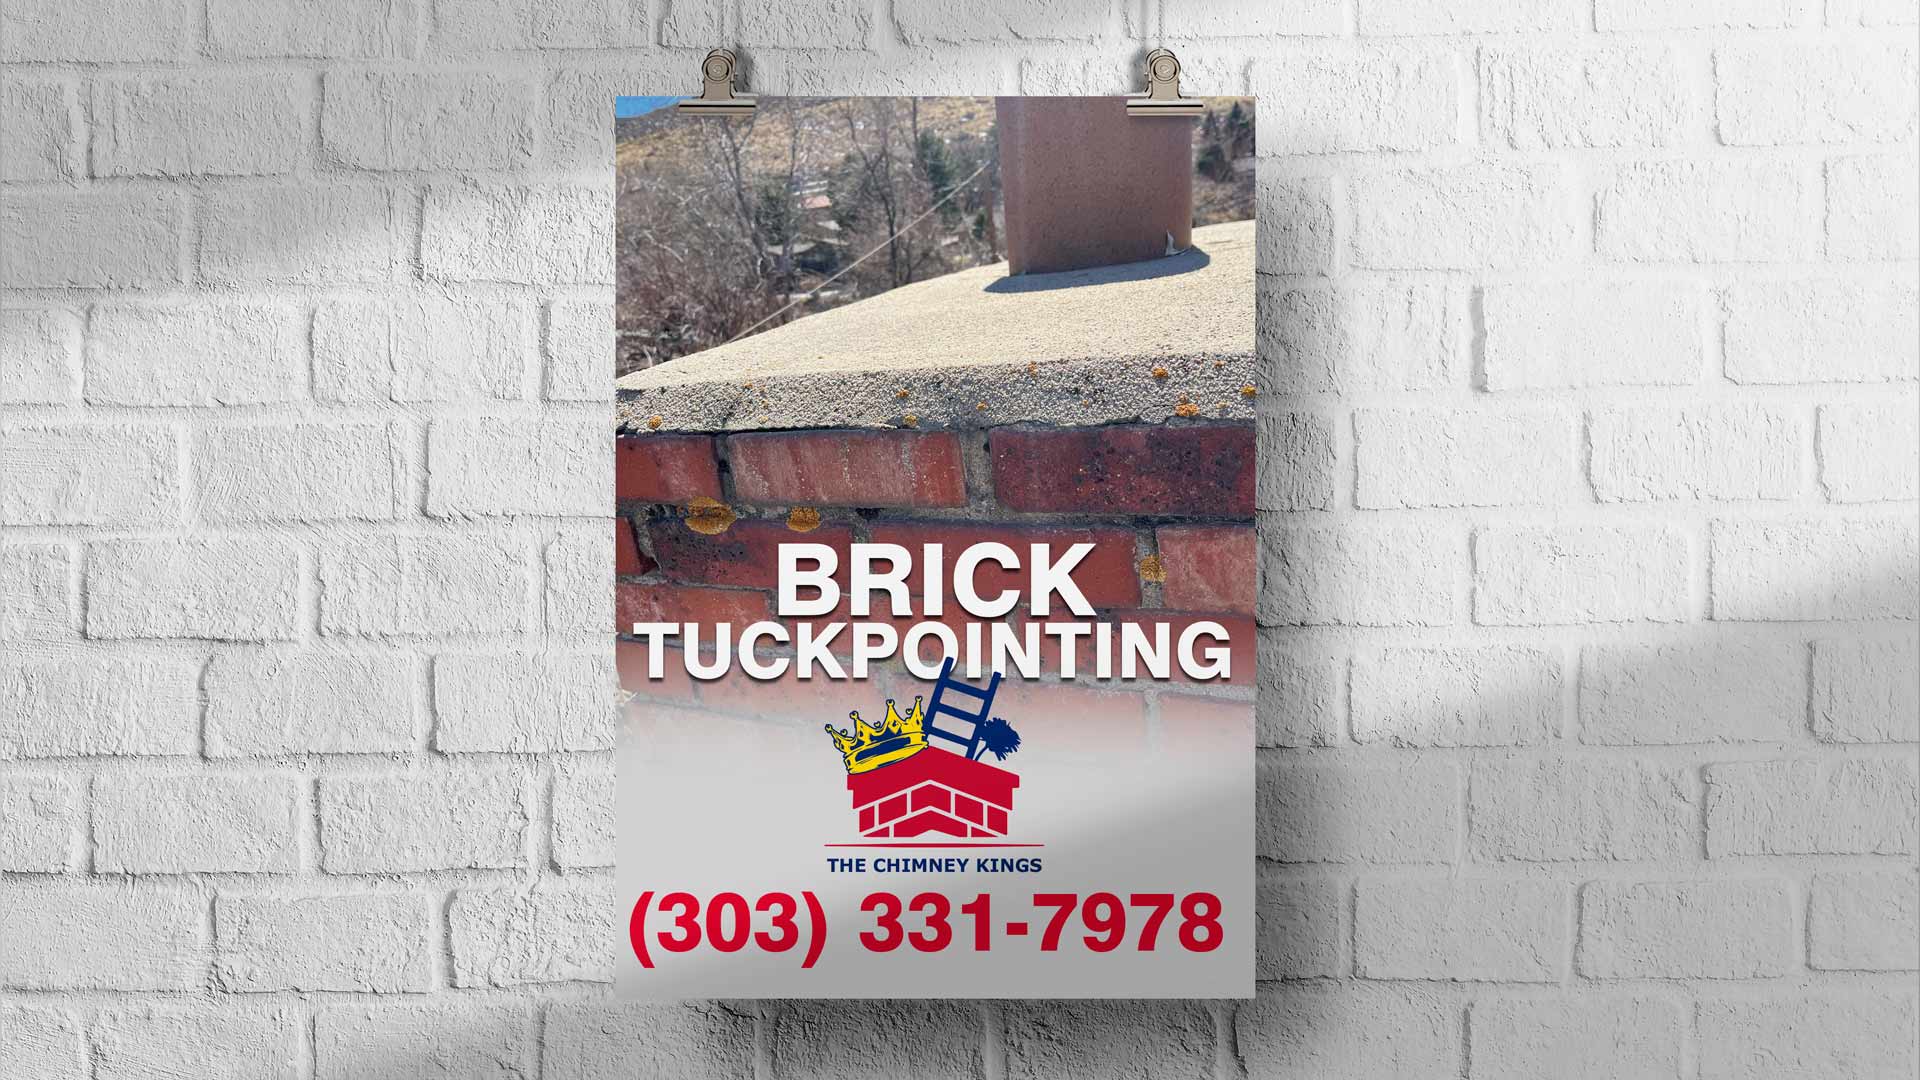 tuckpointing services in denver